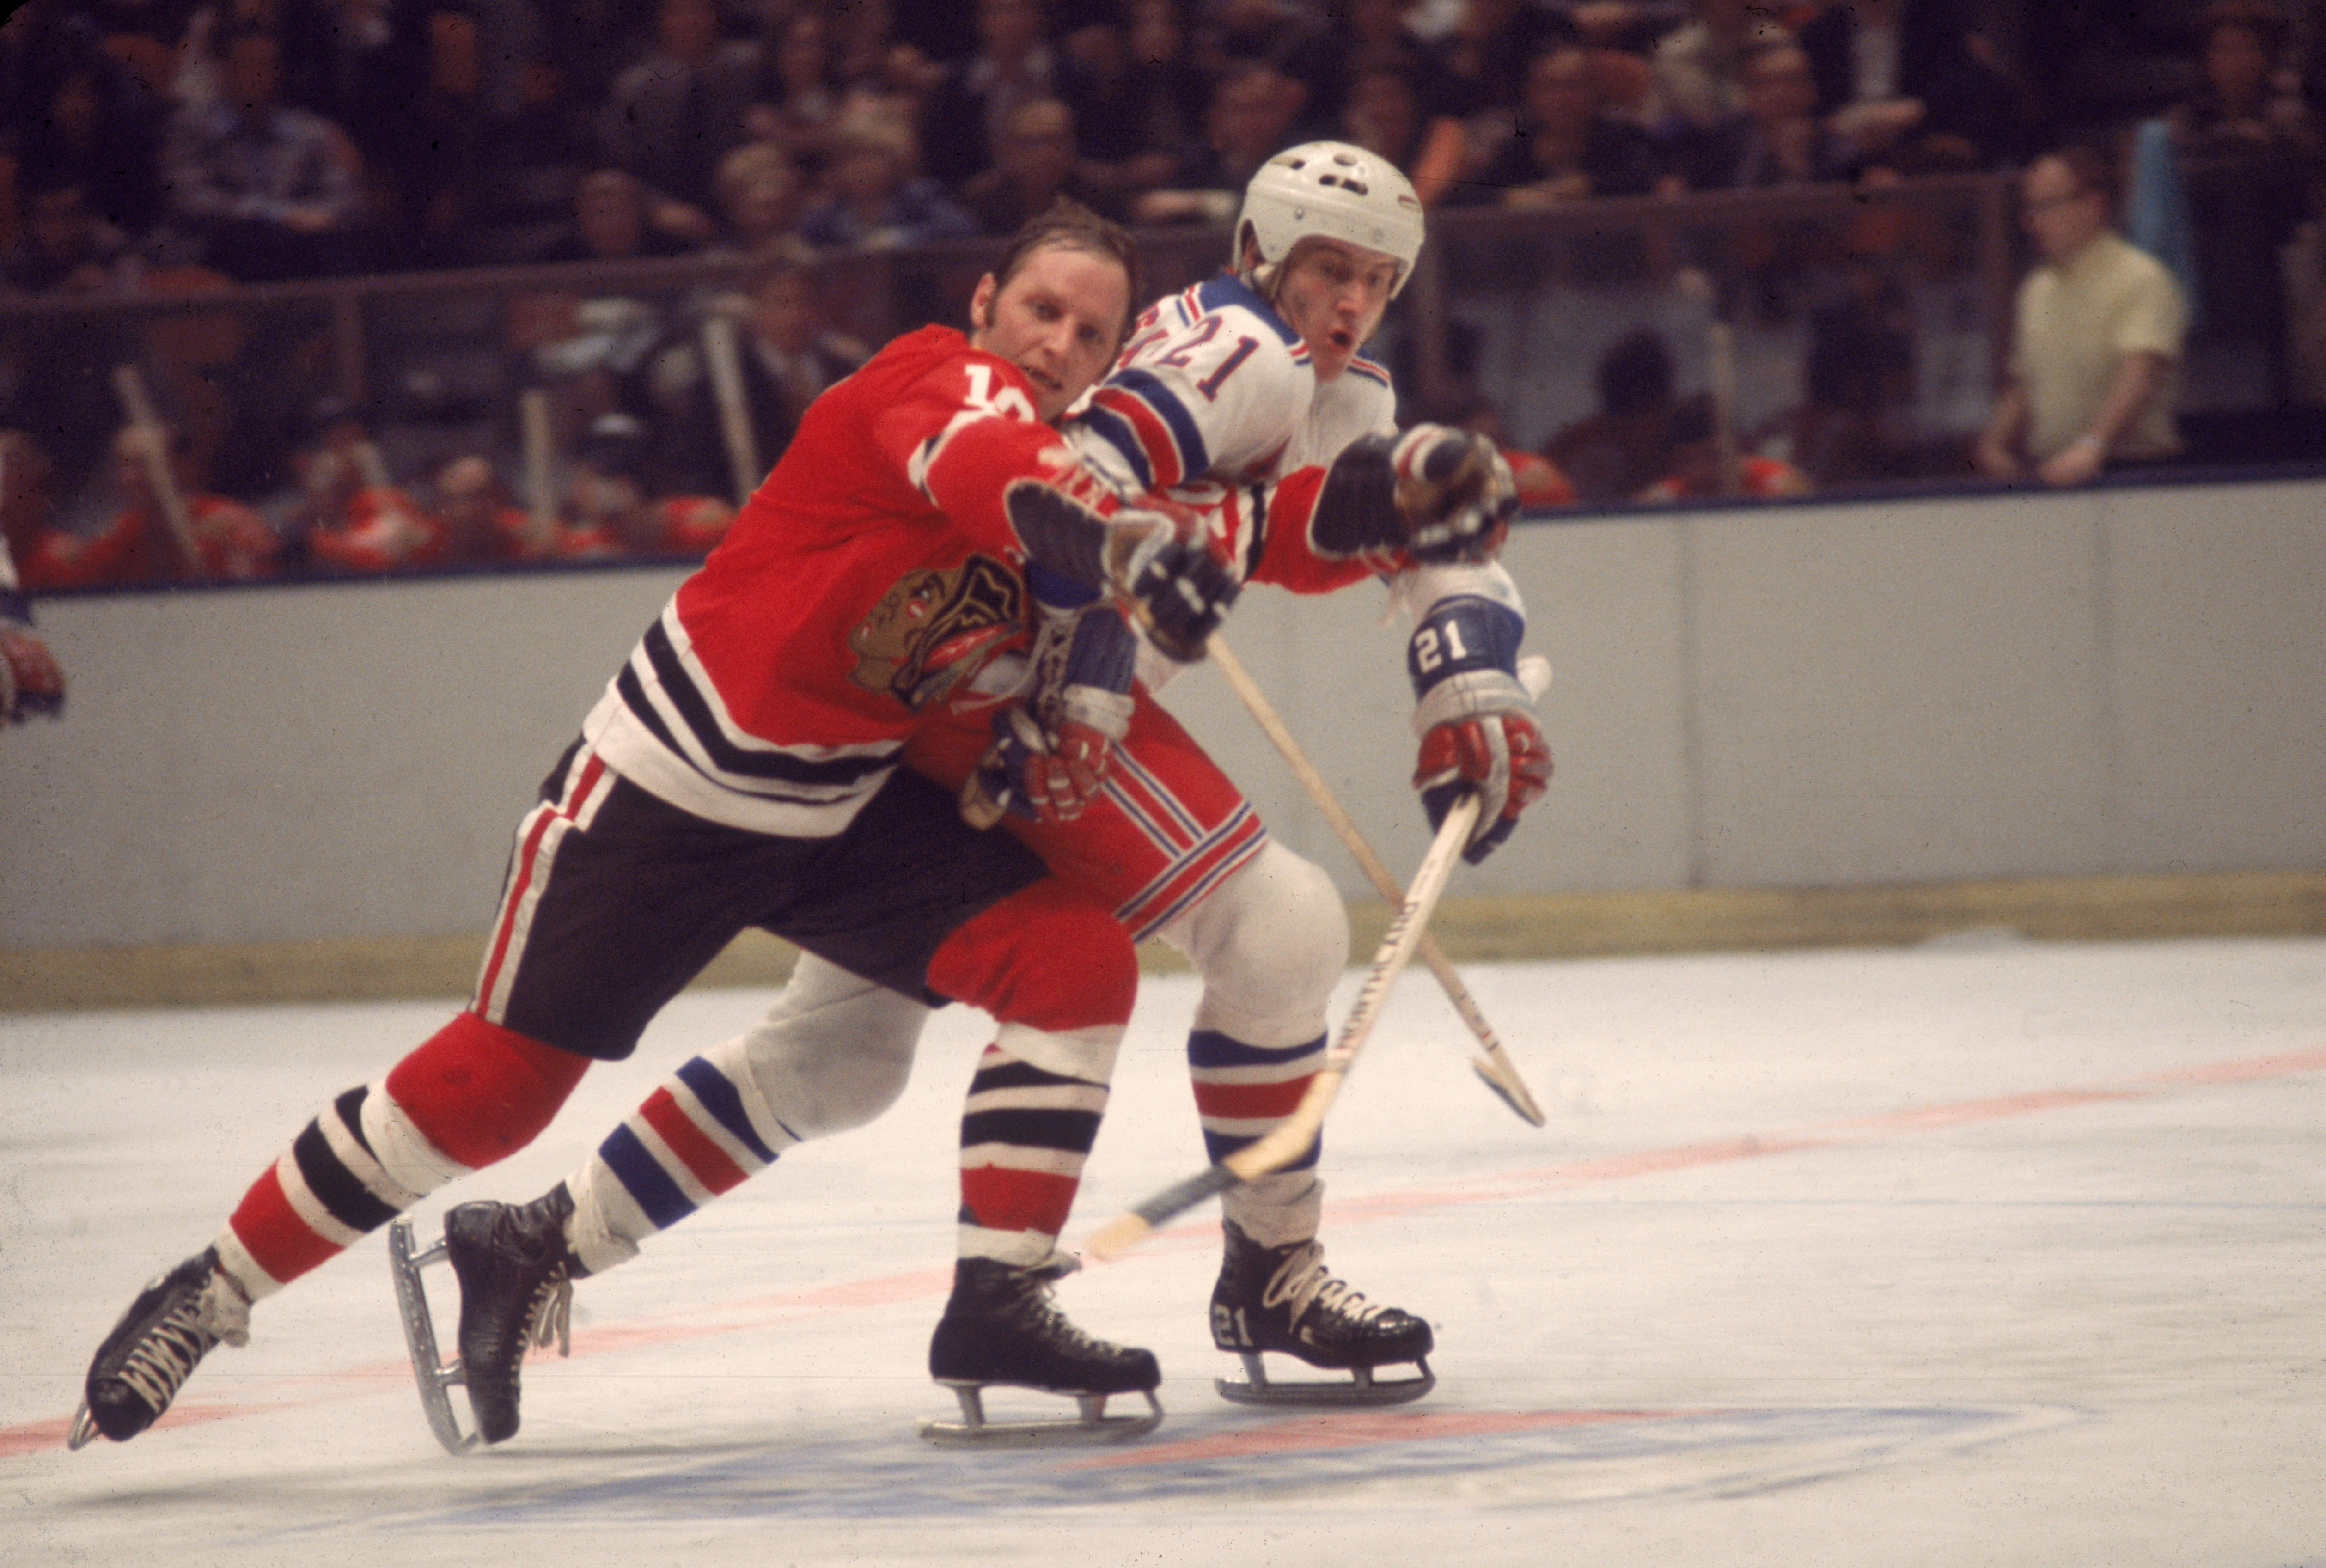 Canadian professional ice hockey player Pete Stemkowski #21 (right) of the New York Rangers checks opponent Dennis Hull #10 of the Chicago Blackhawks as they struggle on the ice during a game at Madison Square Garden, New York, 1970s. Stemkowski played for the Rangers from 1971 to 1977. (Photo by Melchior DiGiacomo/Getty Images)